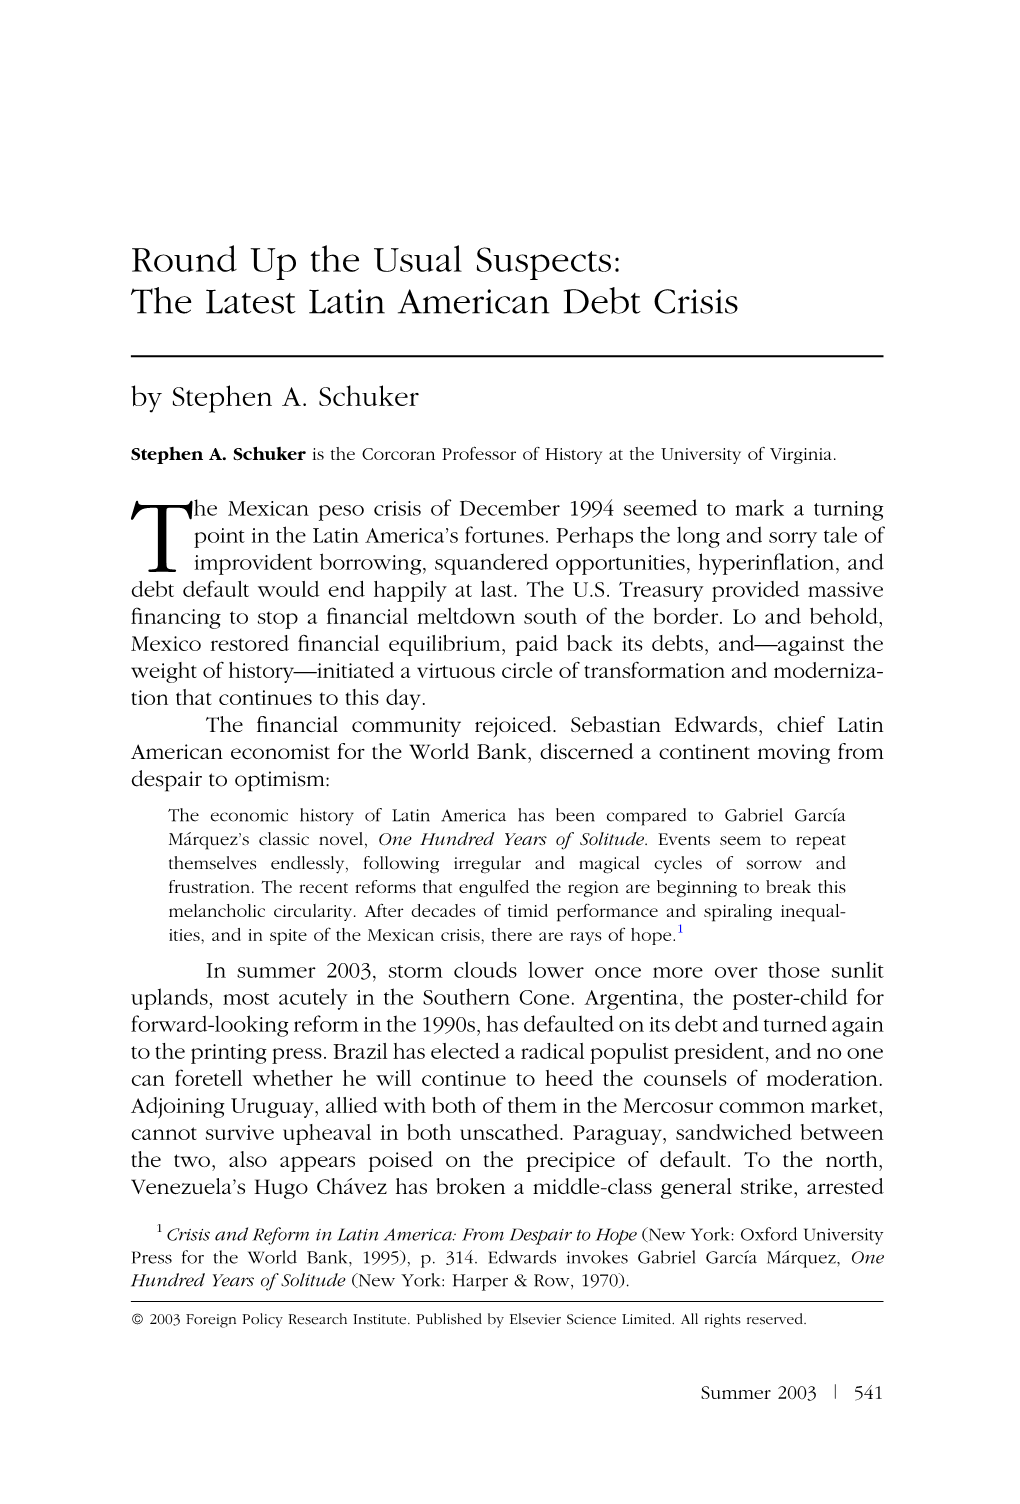 Round up the Usual Suspects: the Latest Latin American Debt Crisis by Stephen A